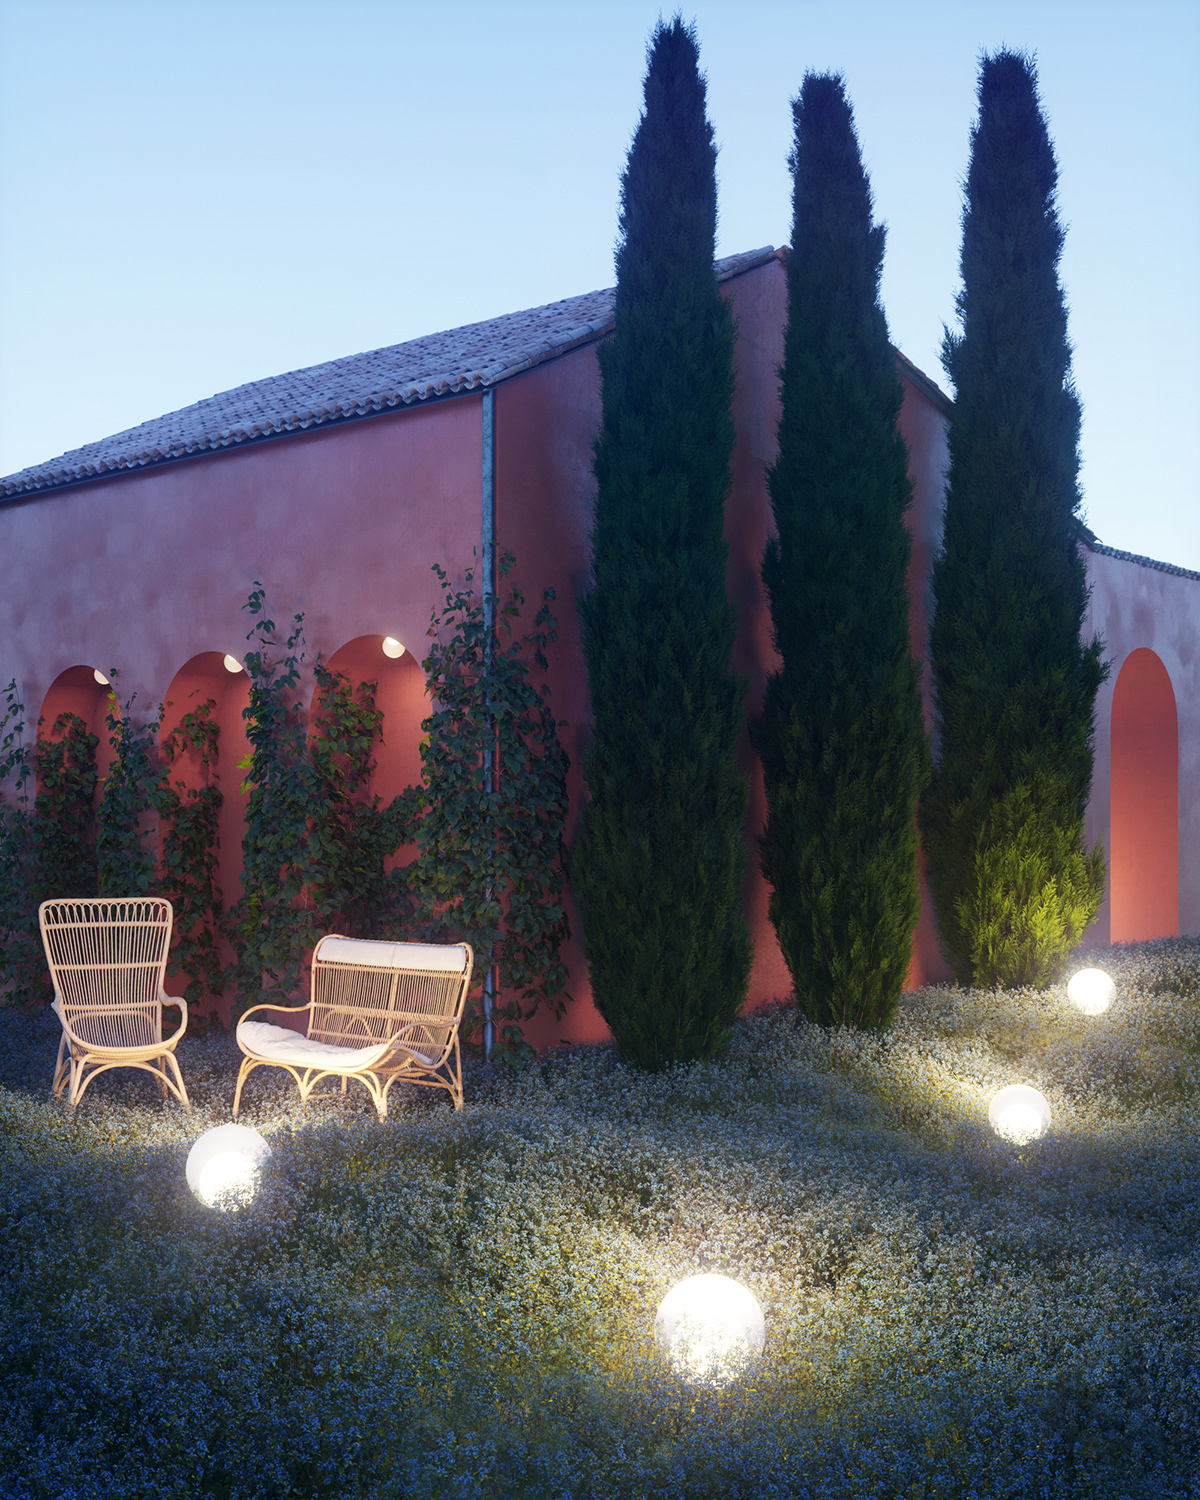 3ds max architecture CGI concept corona renderer Italy summer